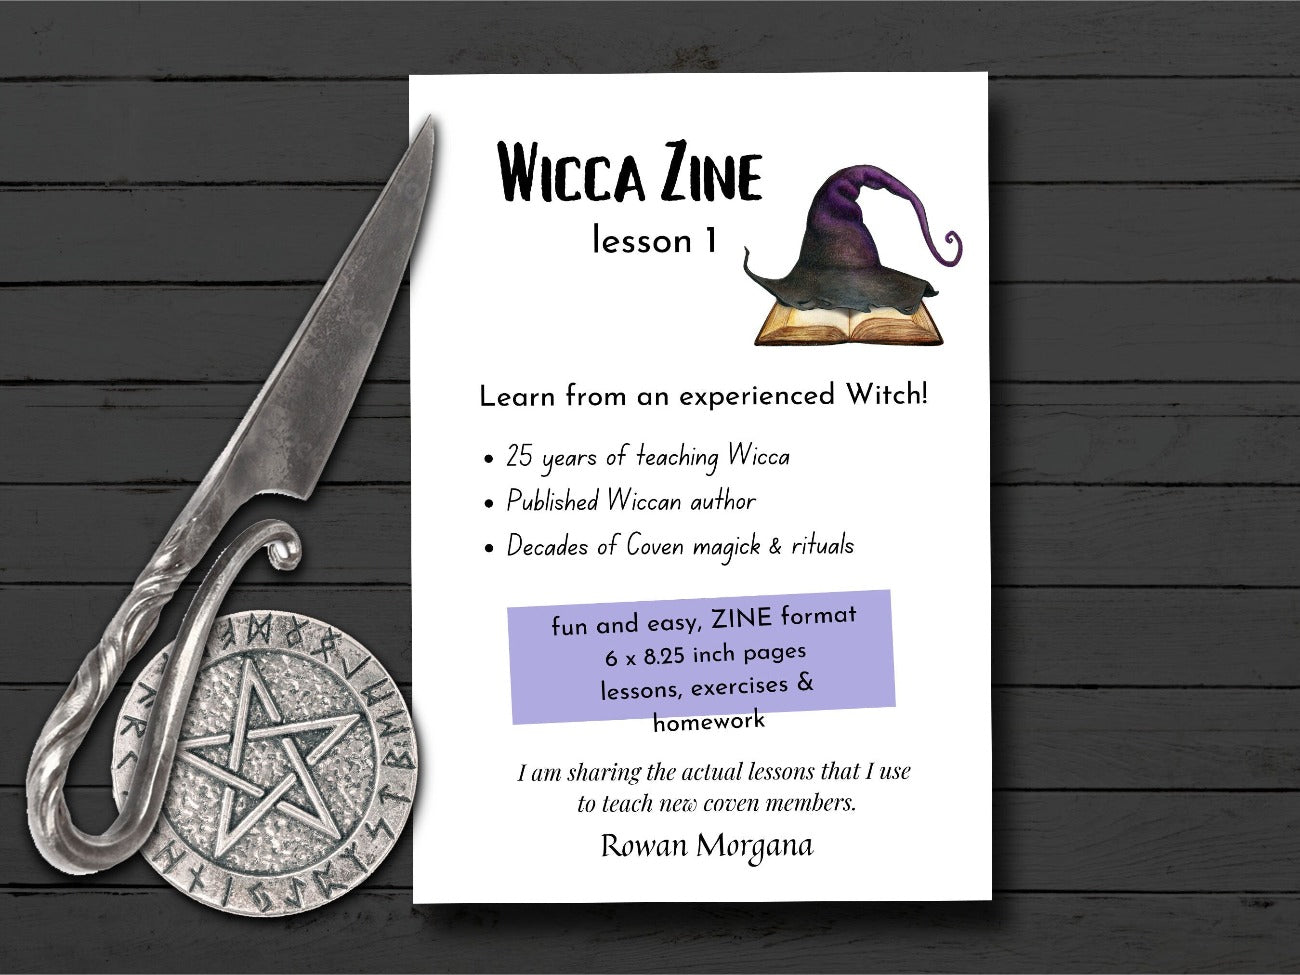 Learn from an experienced Witch with 25 years of teaching skills.